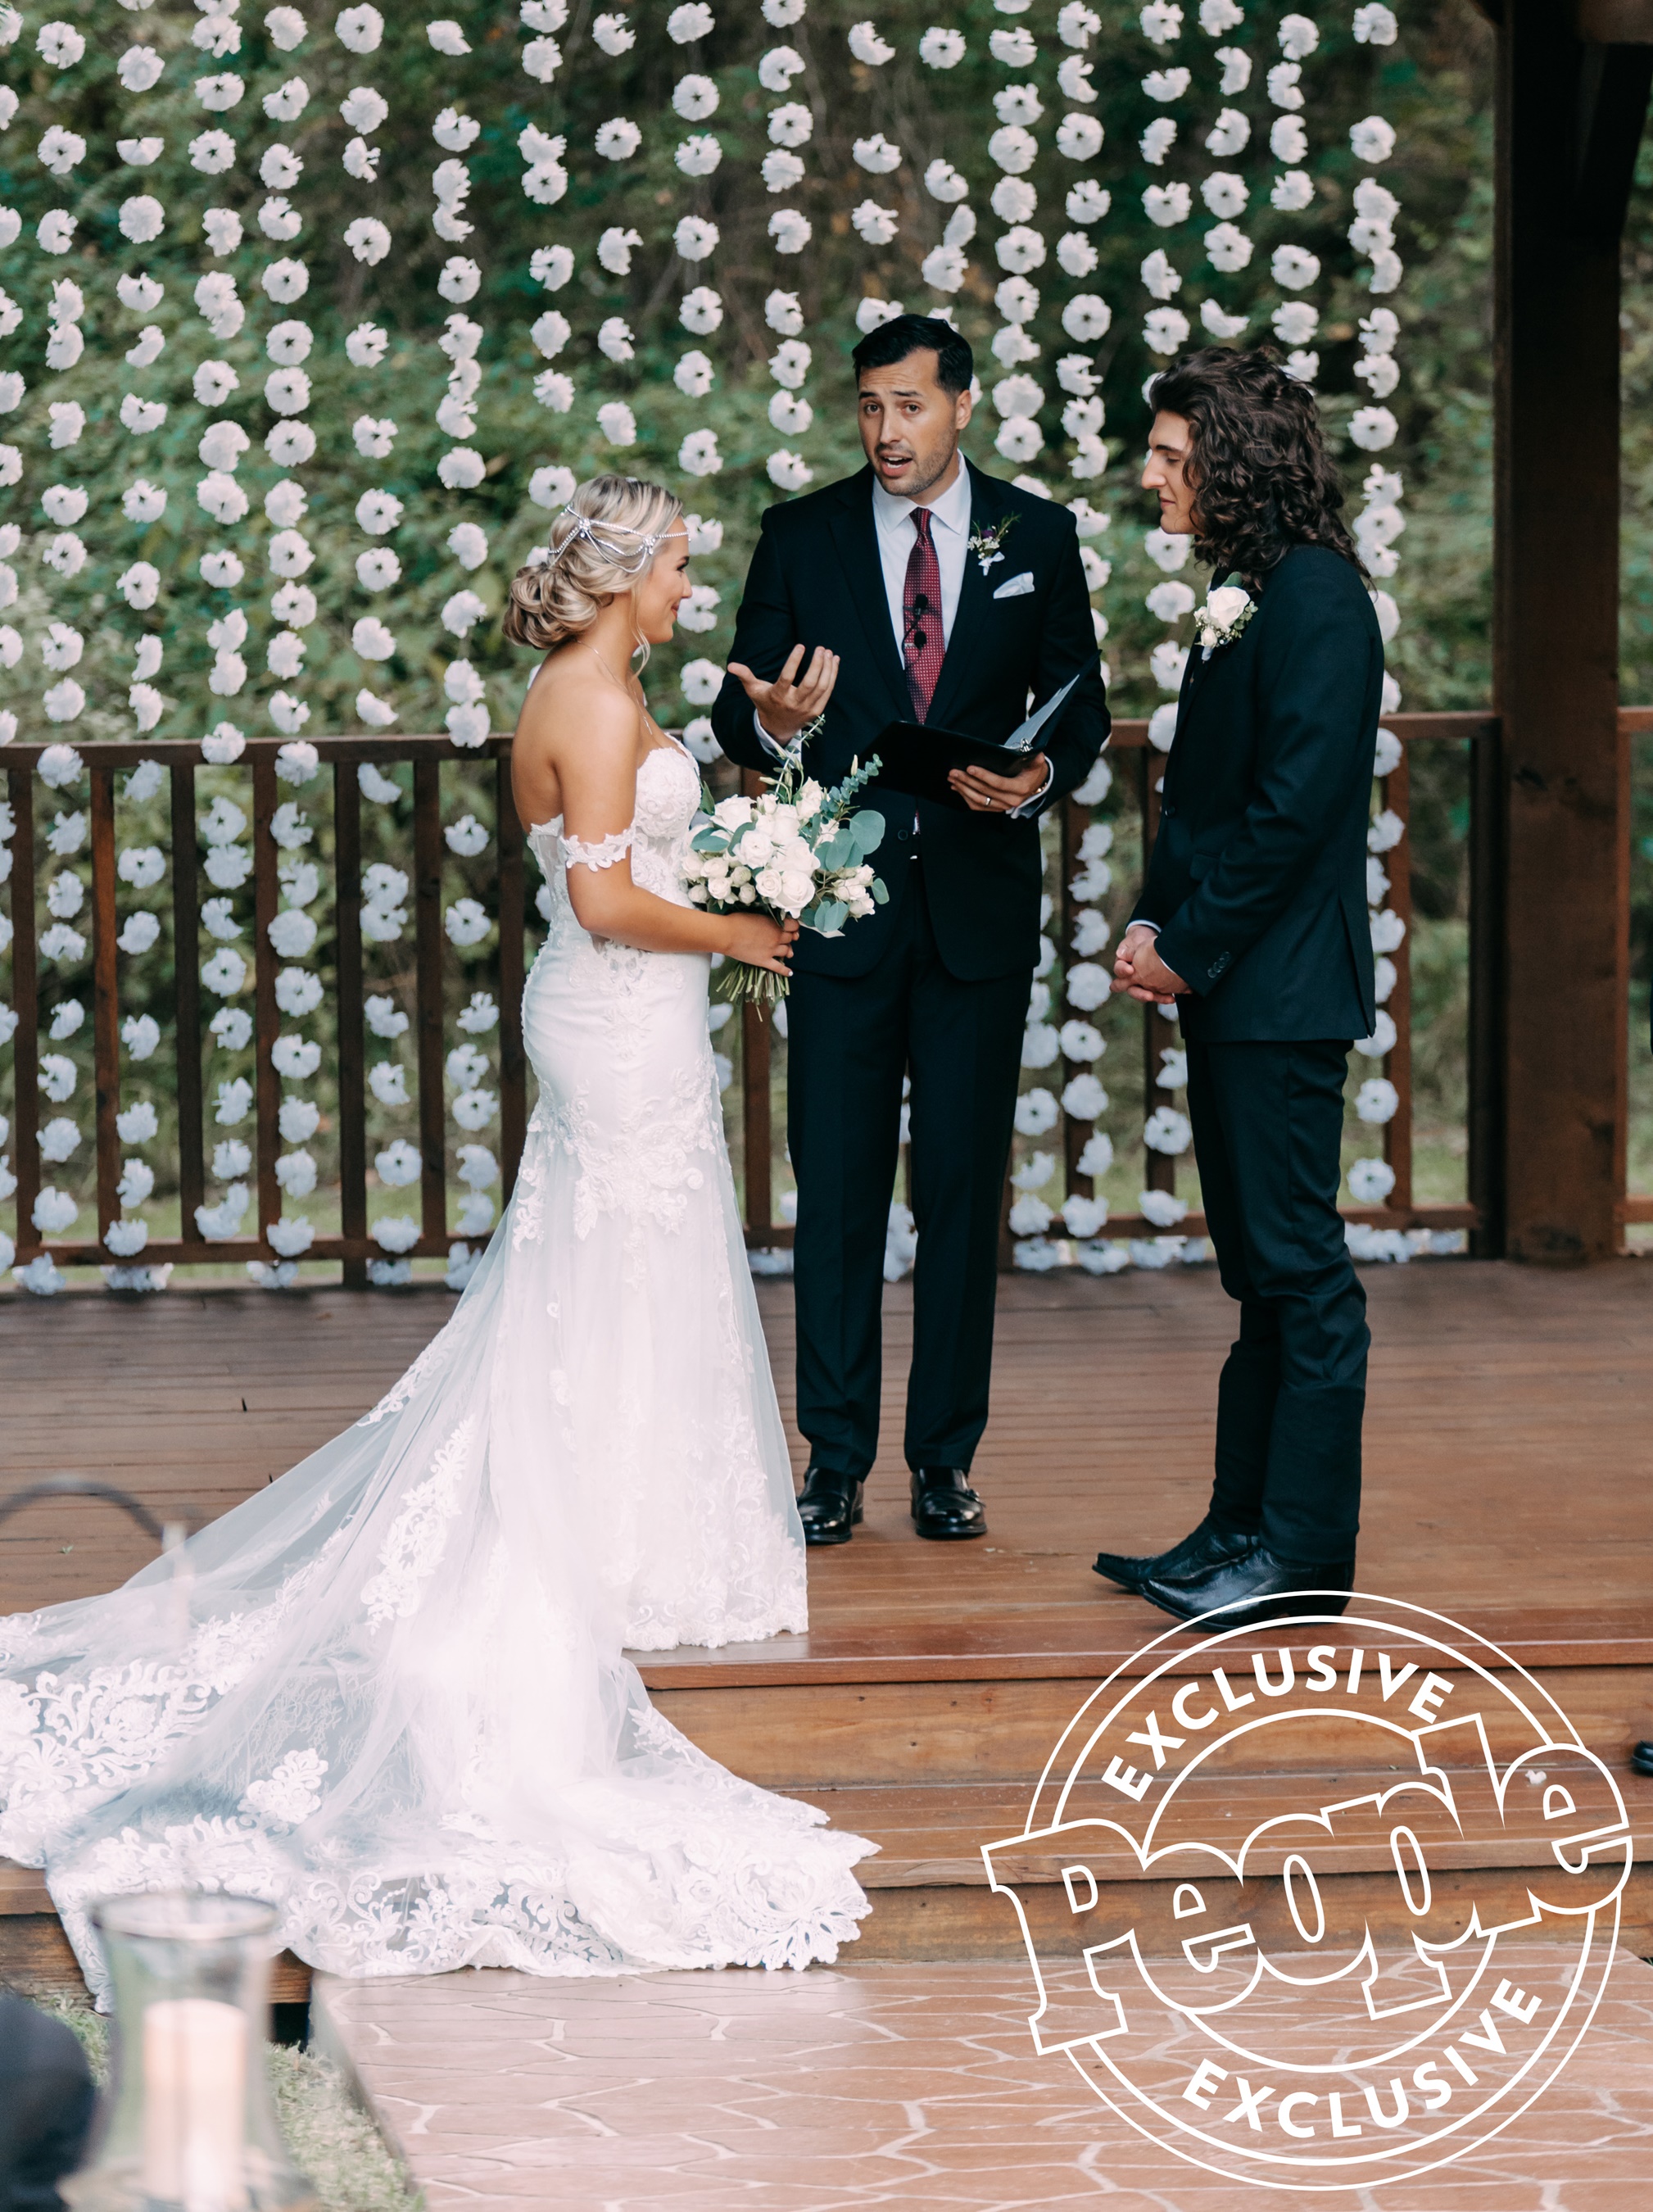 Jeremy Vuolo marrying Cade Foehner and Gabby Barrett on their wedding day at Union Springs Wedding and Event Venue - Garrison, TX - October 5, 2019
Photo credit: People.com | Lilly Welch
